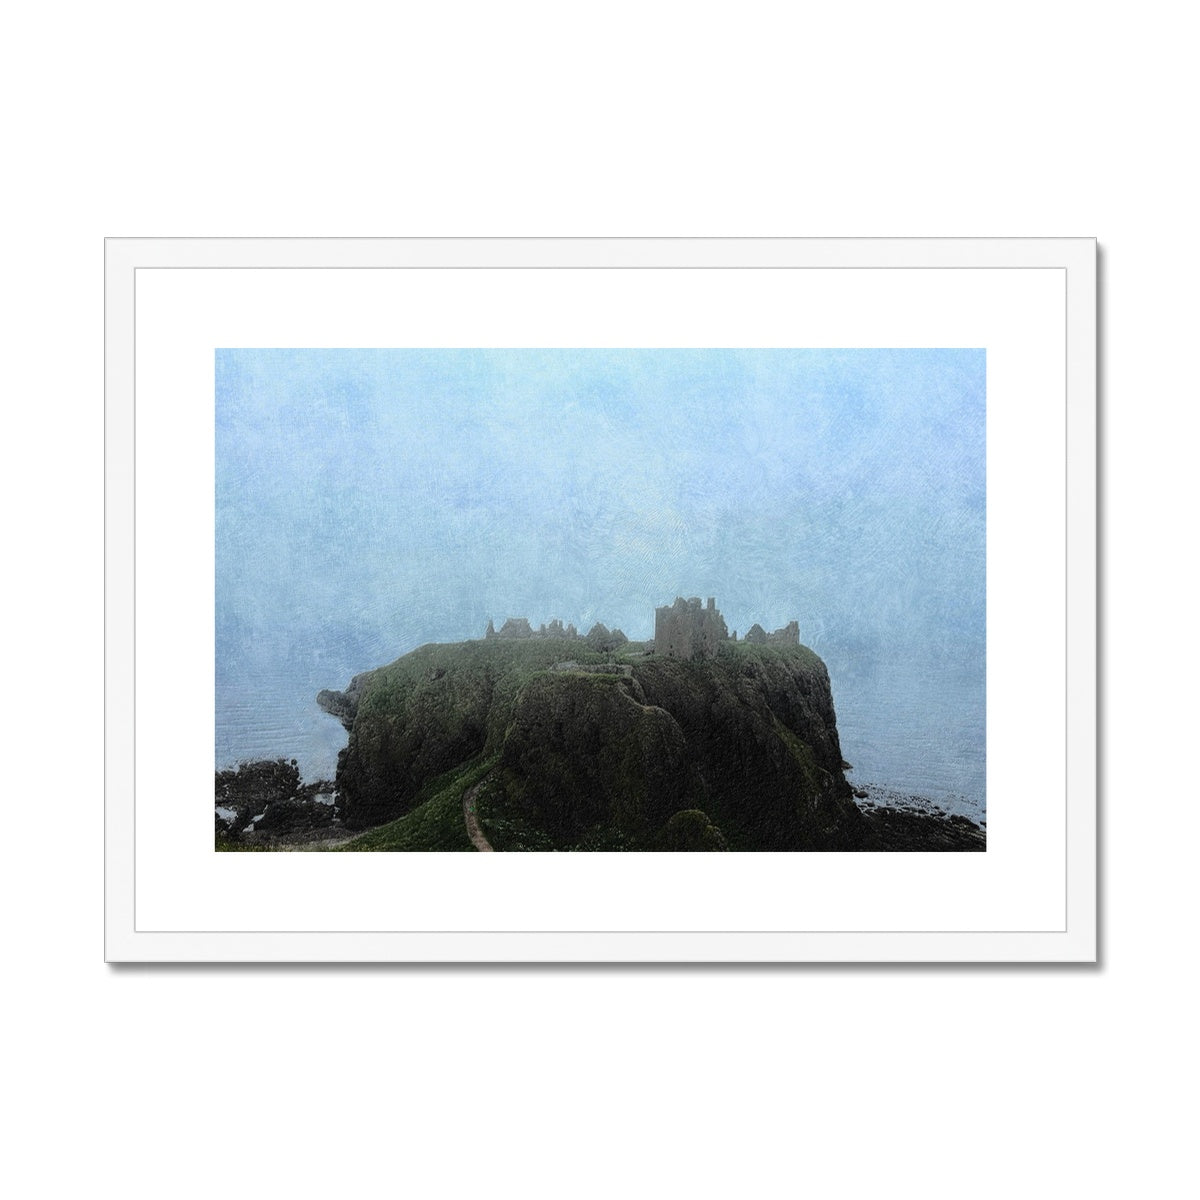 Dunnottar Castle Mist Painting | Framed & Mounted Prints From Scotland-Framed & Mounted Prints-Historic & Iconic Scotland Art Gallery-A2 Landscape-White Frame-Paintings, Prints, Homeware, Art Gifts From Scotland By Scottish Artist Kevin Hunter